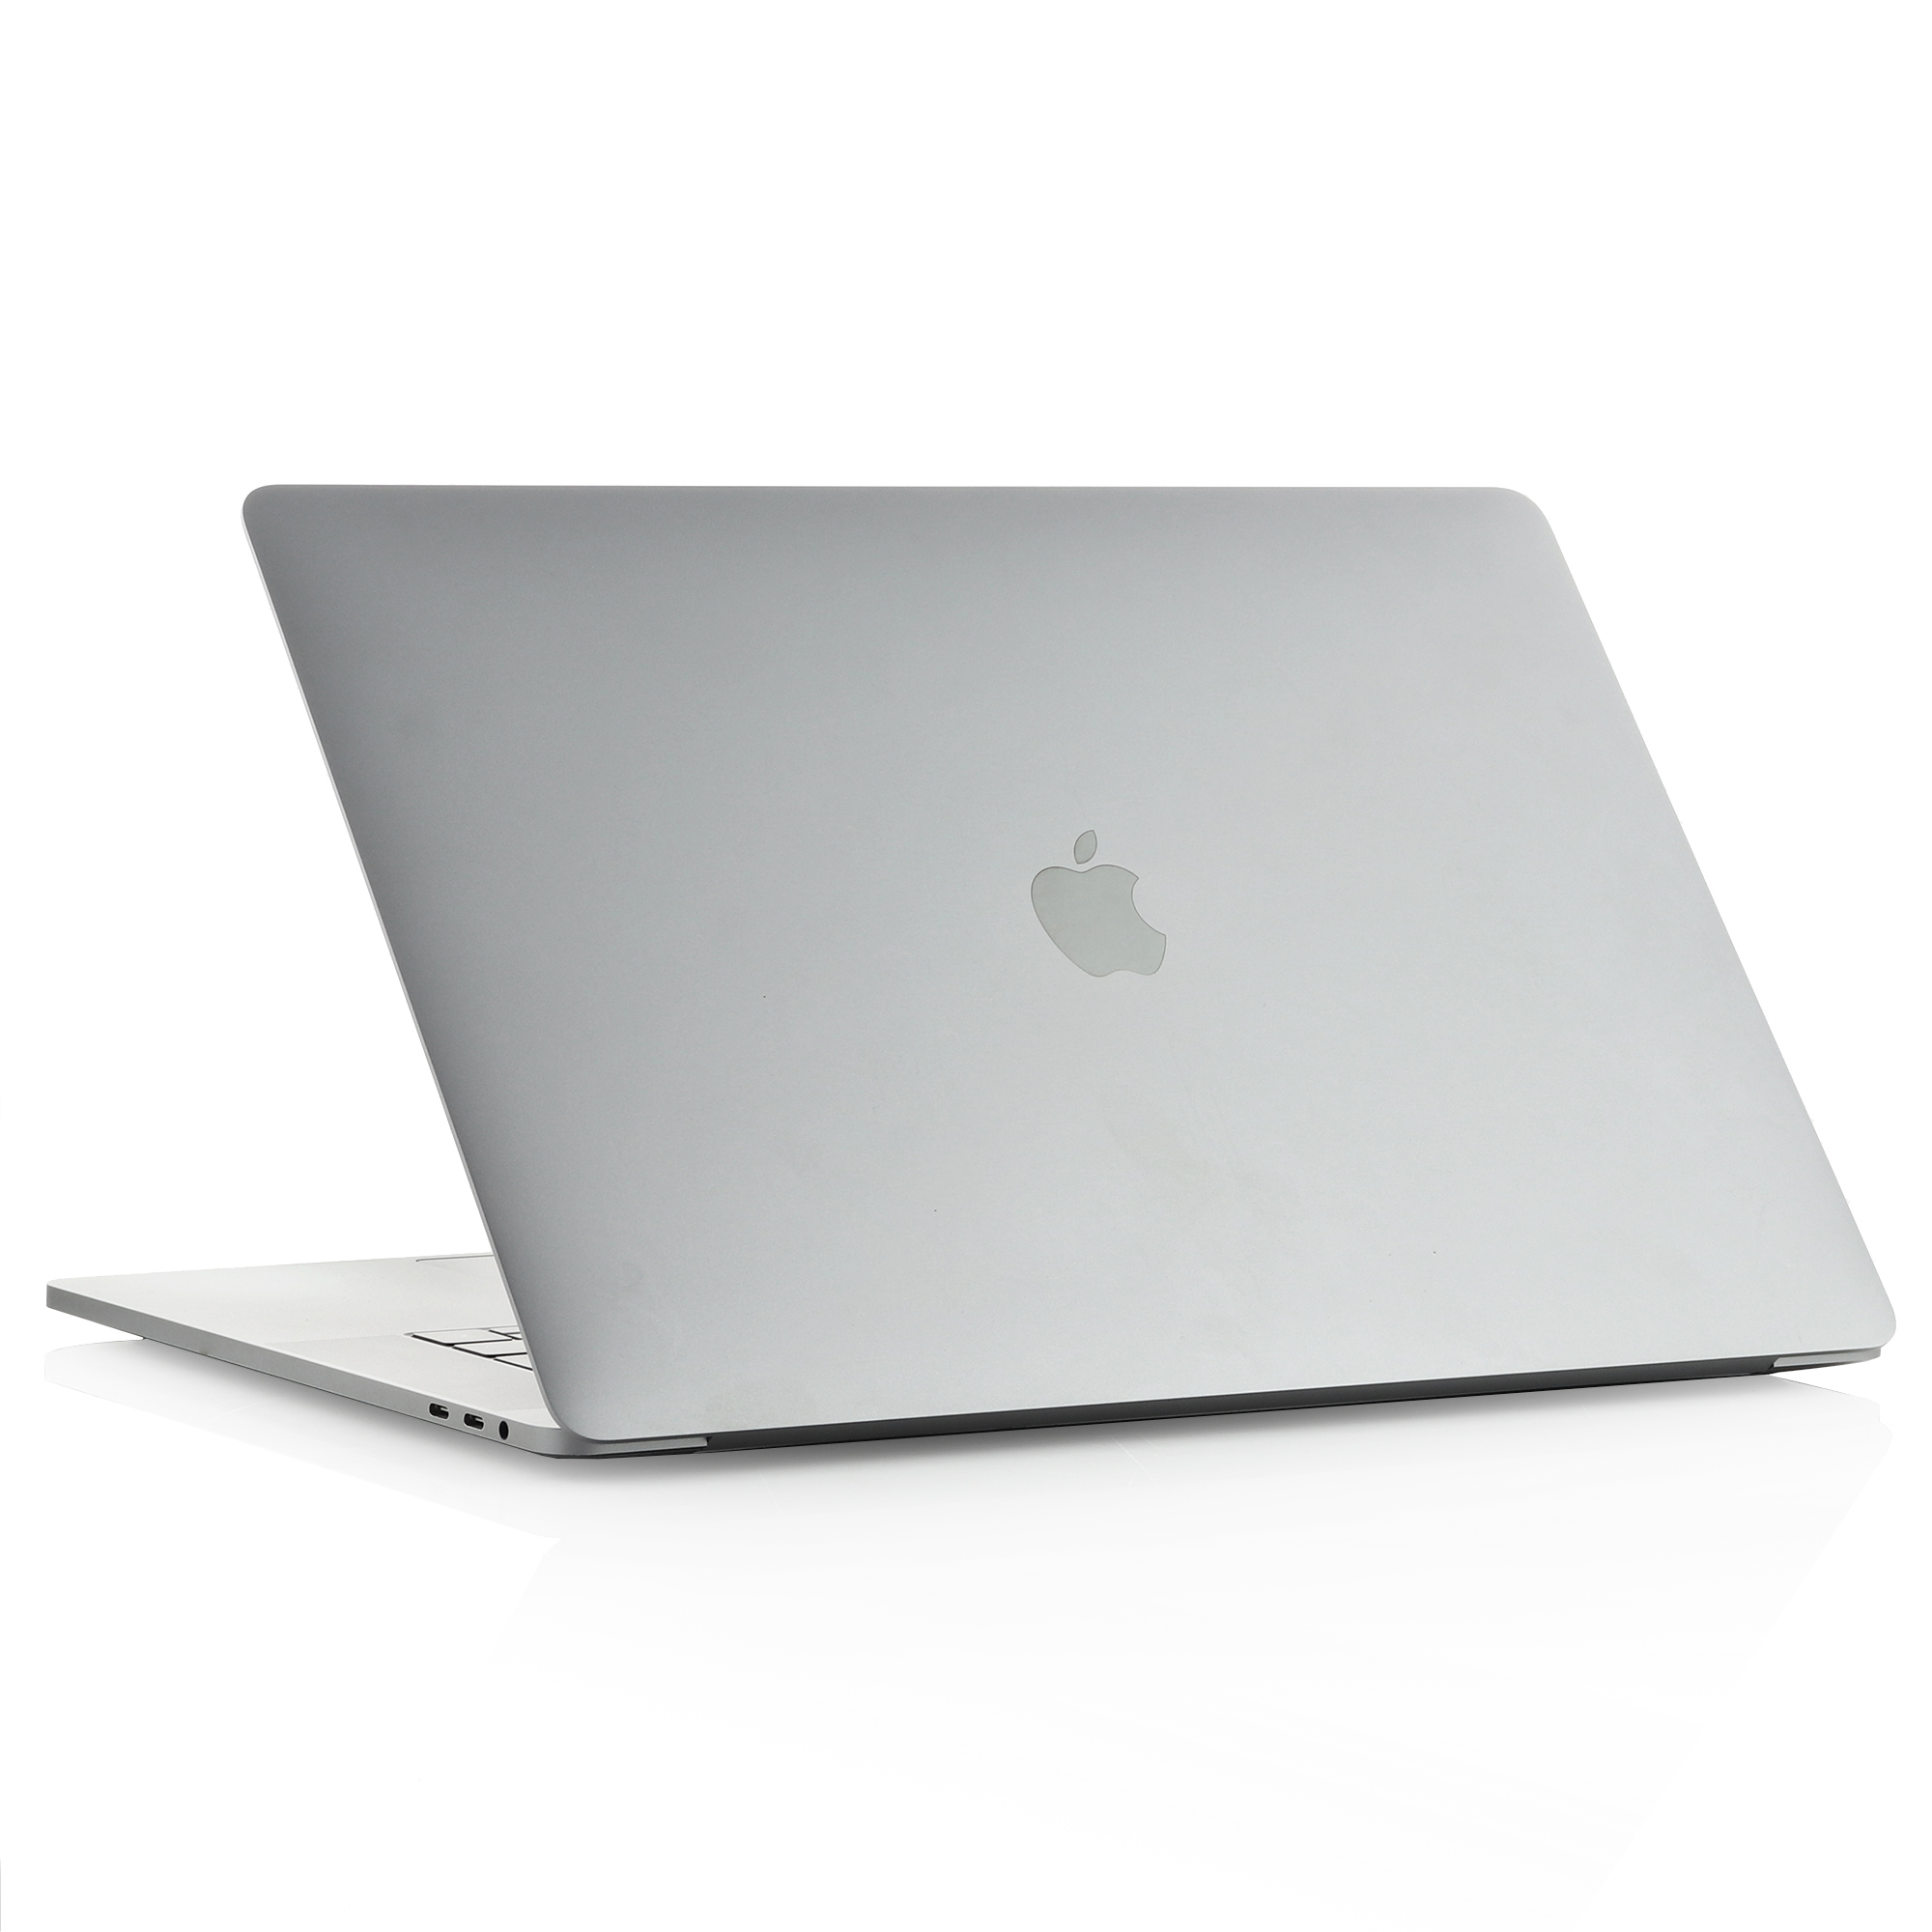 2019 Apple MacBook Pro 15-inch Intel i9 2.3 GHz 8-core 16GB 512GB - Space  Grey - MacFinder - Certified Refurbished Apple Systems